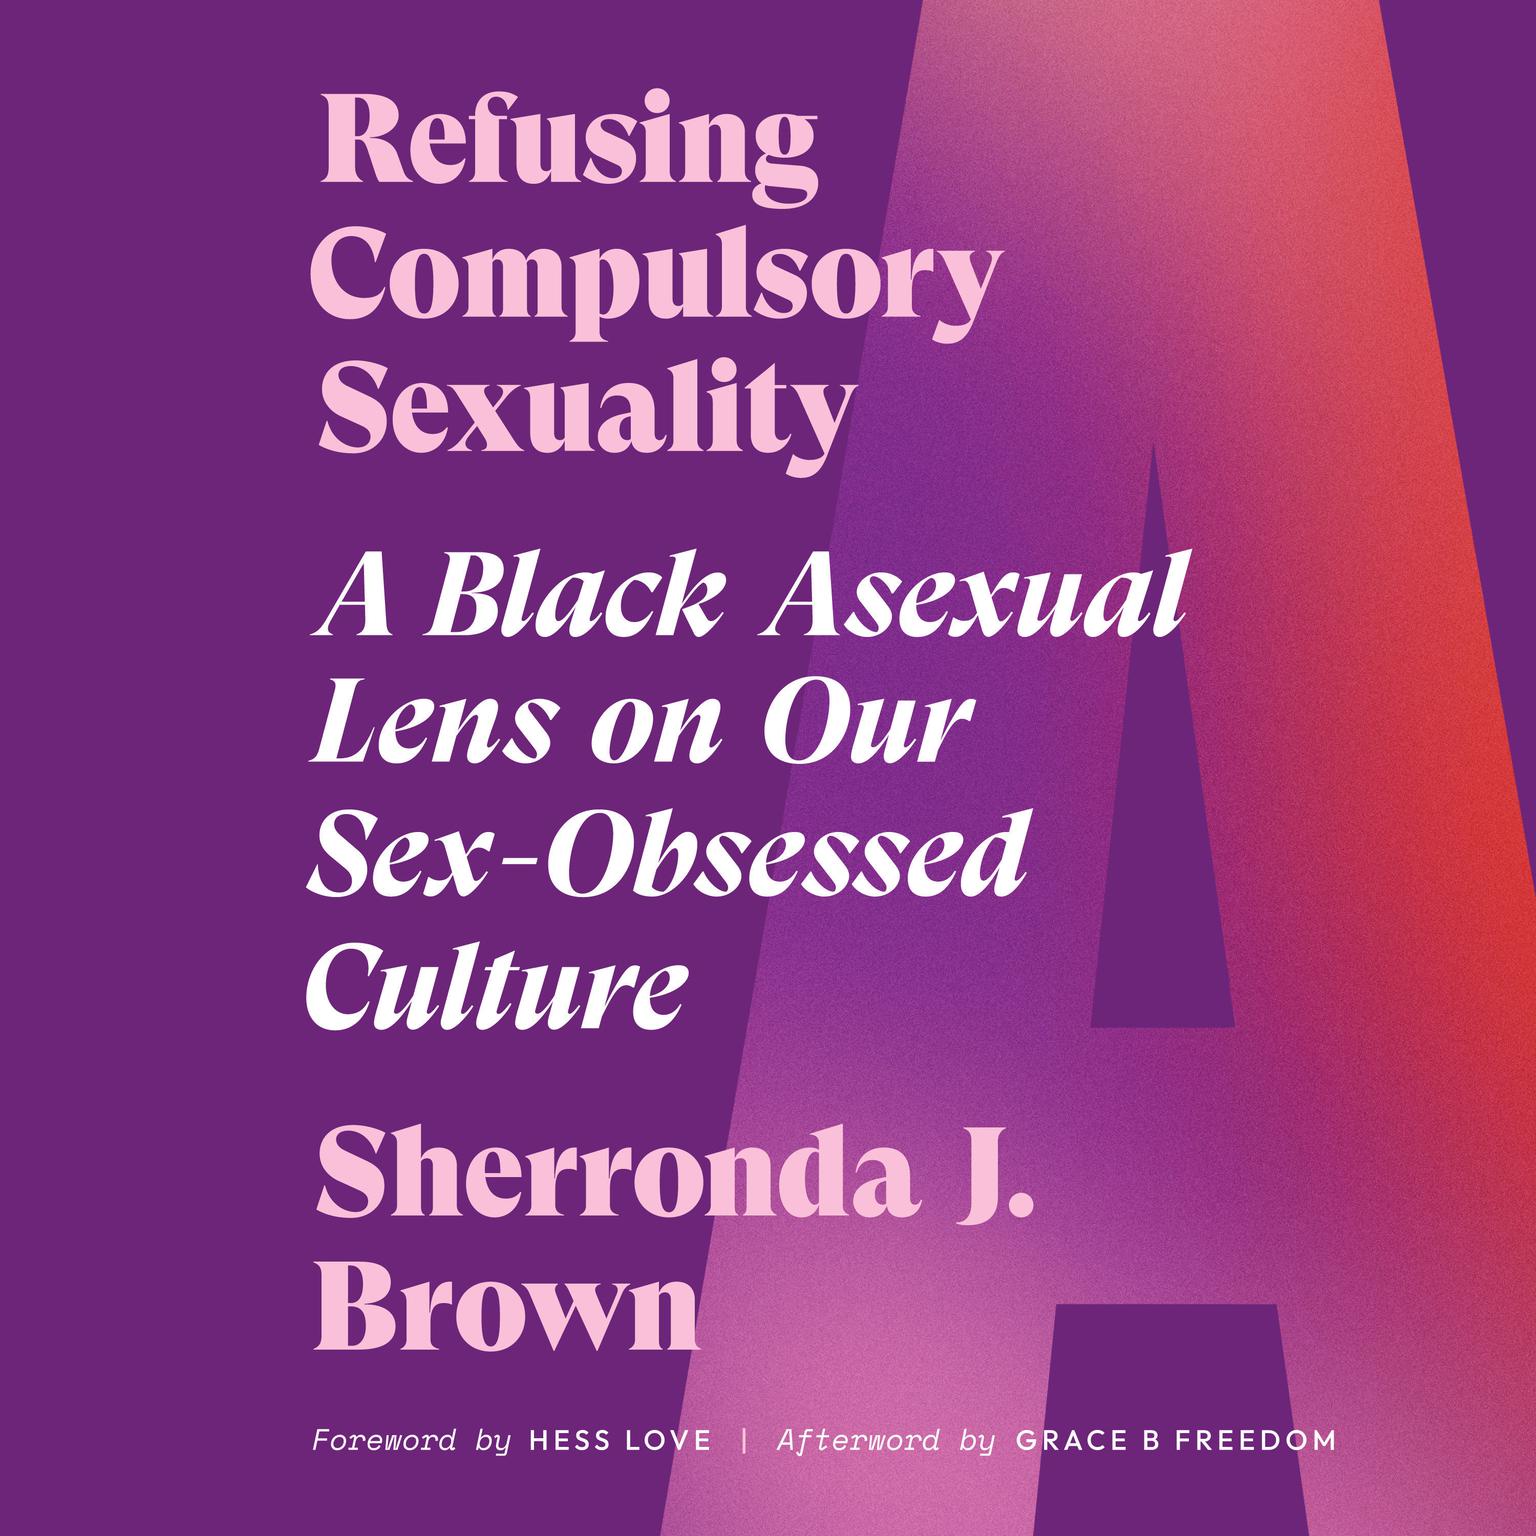 Refusing Compulsory Sexuality: A Black Asexual Lens on Our Sex-Obsessed Culture Audiobook, by Sherronda J. Brown